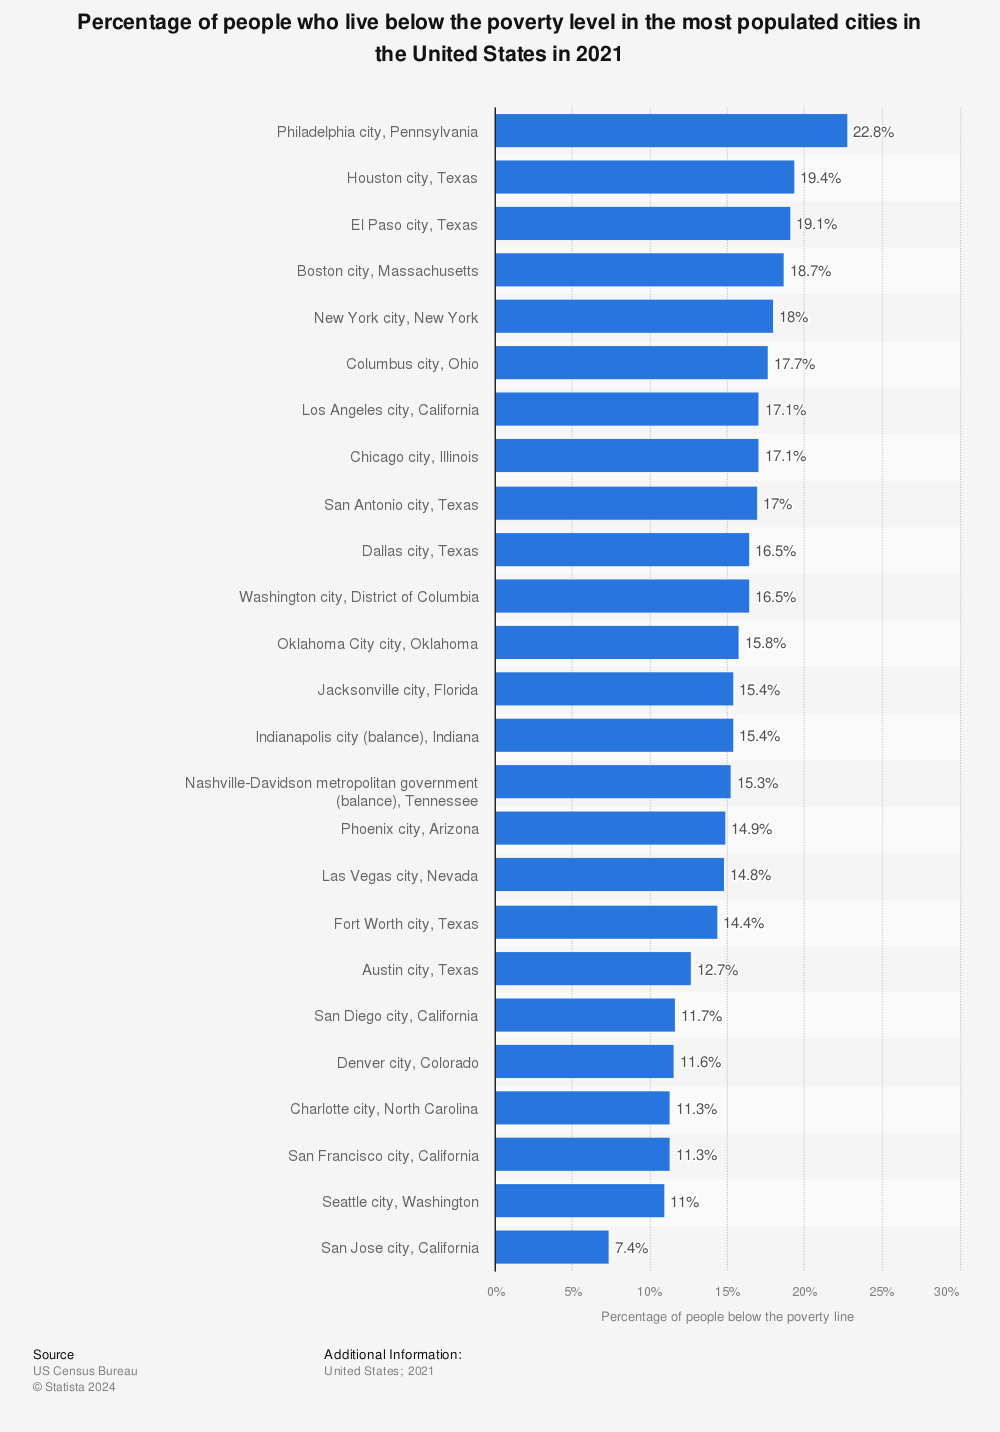 Statistic: Percentage of people who live below the poverty level in the most populated cities in the United States in 2021 | Statista